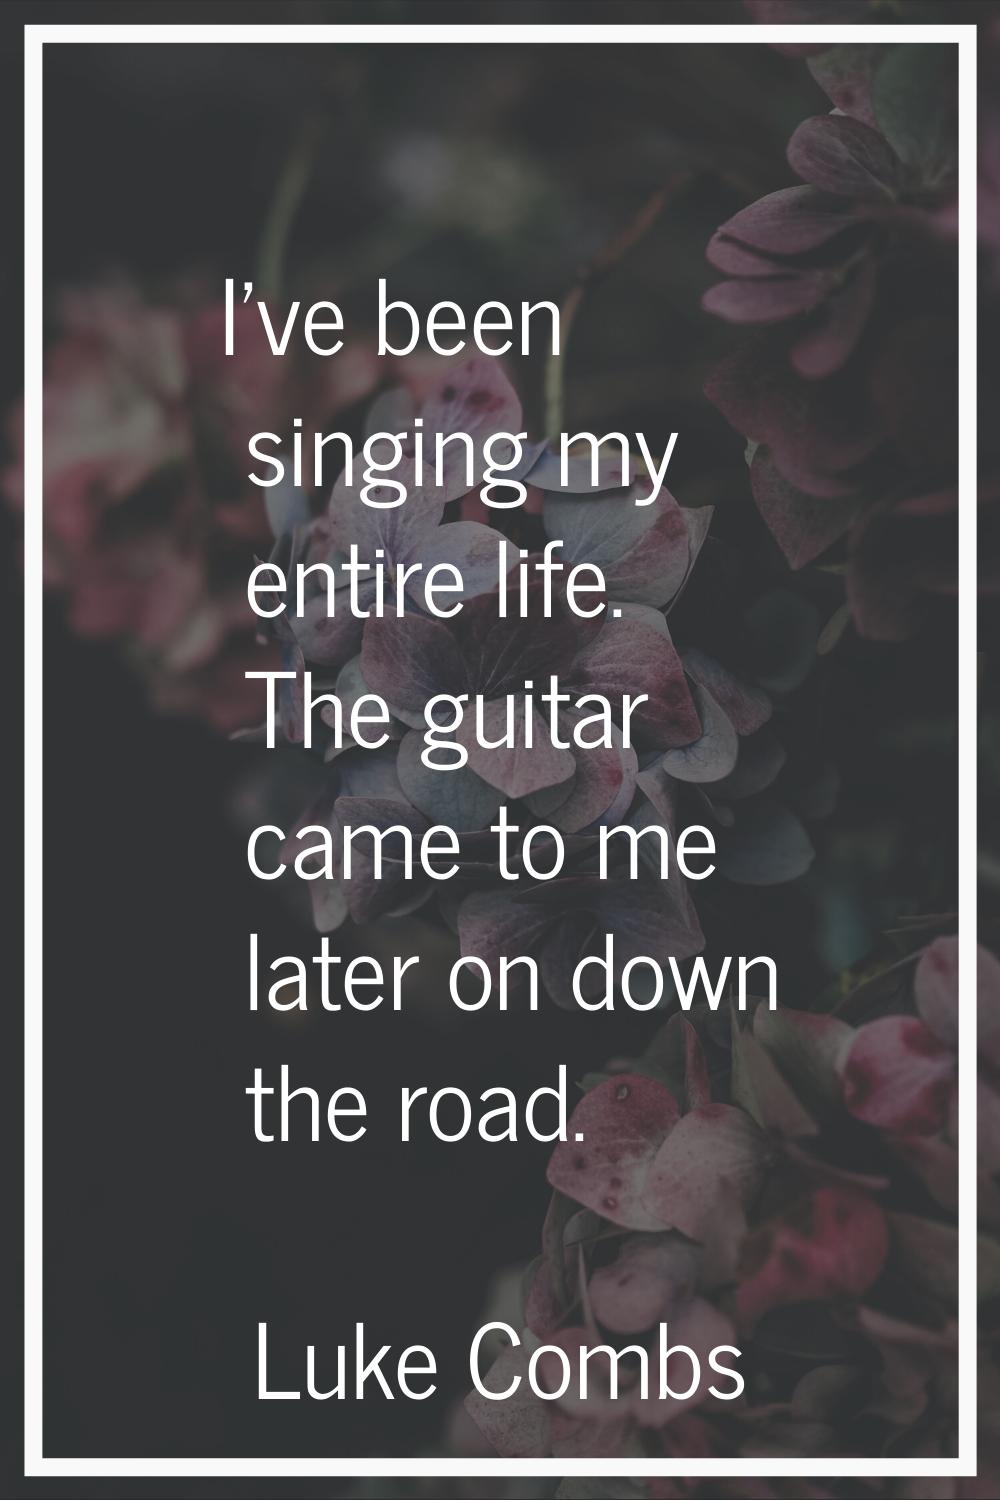 I've been singing my entire life. The guitar came to me later on down the road.